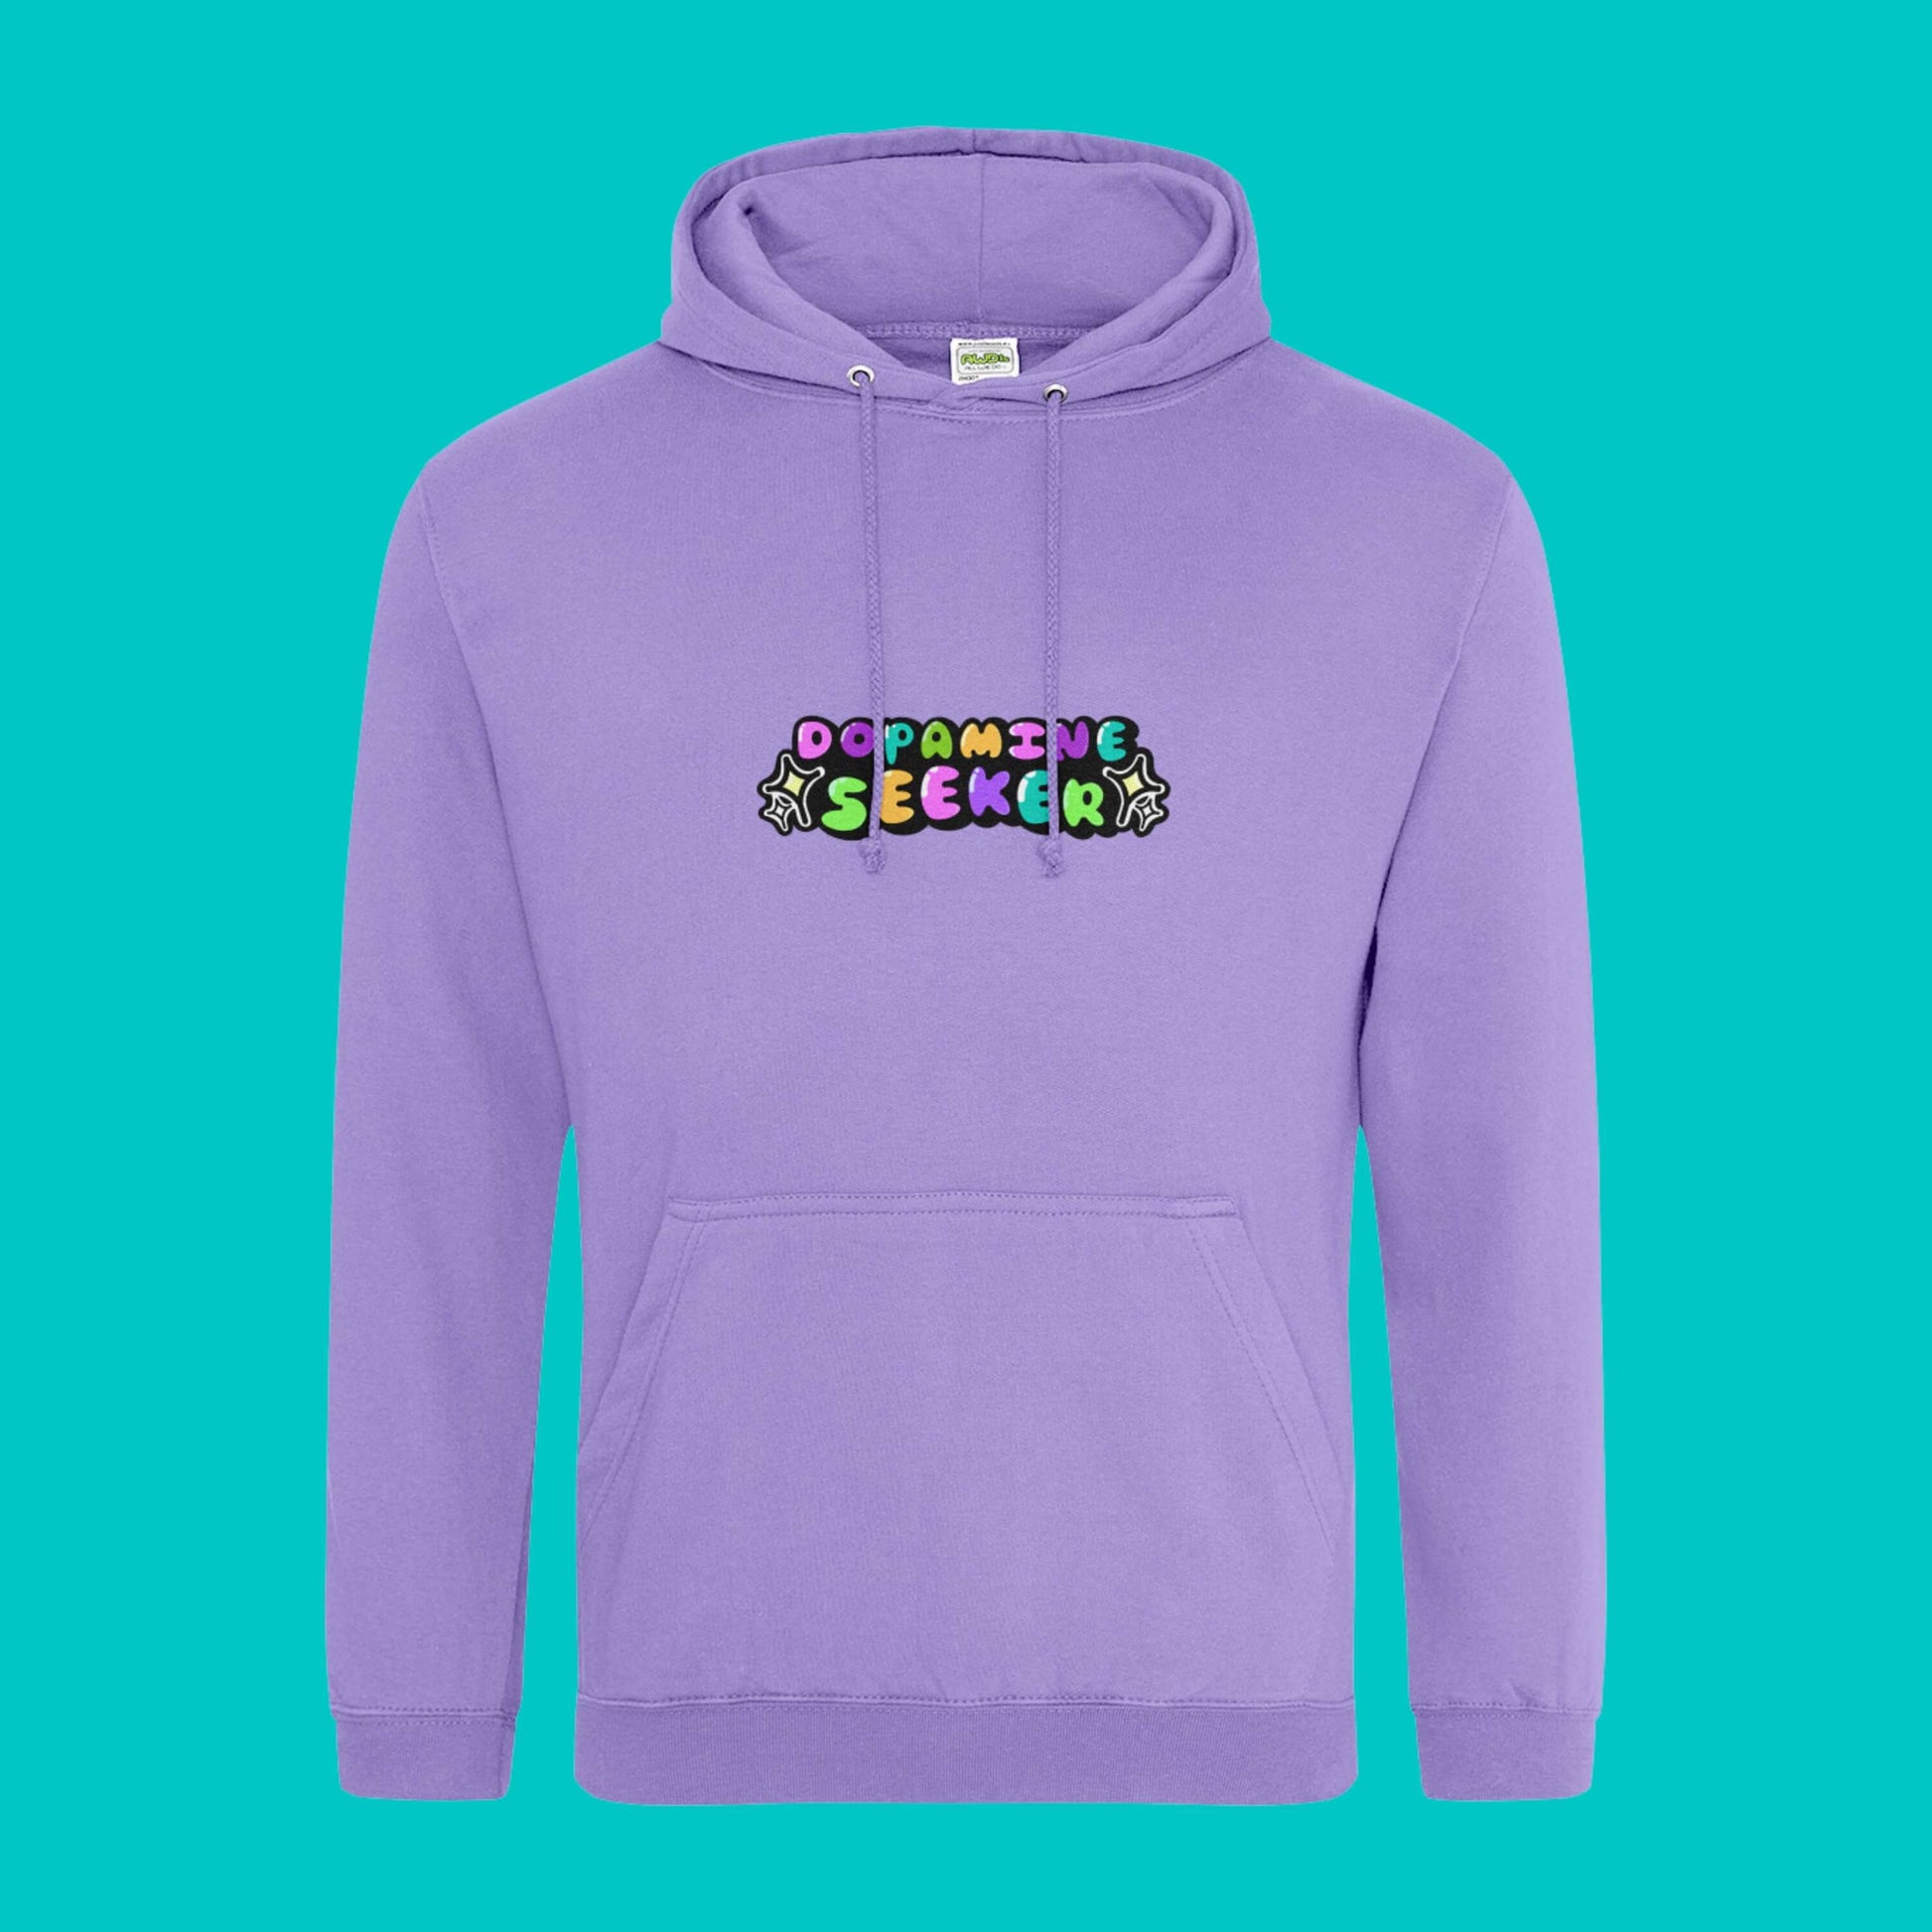 The Dopamine Seeker Hoodie in digital lavender on a blue background. The hoodie design has 'dopamine seeker' written in the middle in rainbow bubble font and black sparkle outlines. The hoodie has pastel purple drawstrings and a large centre pocket. Design is raising awareness for ADHD and neurodivergence.